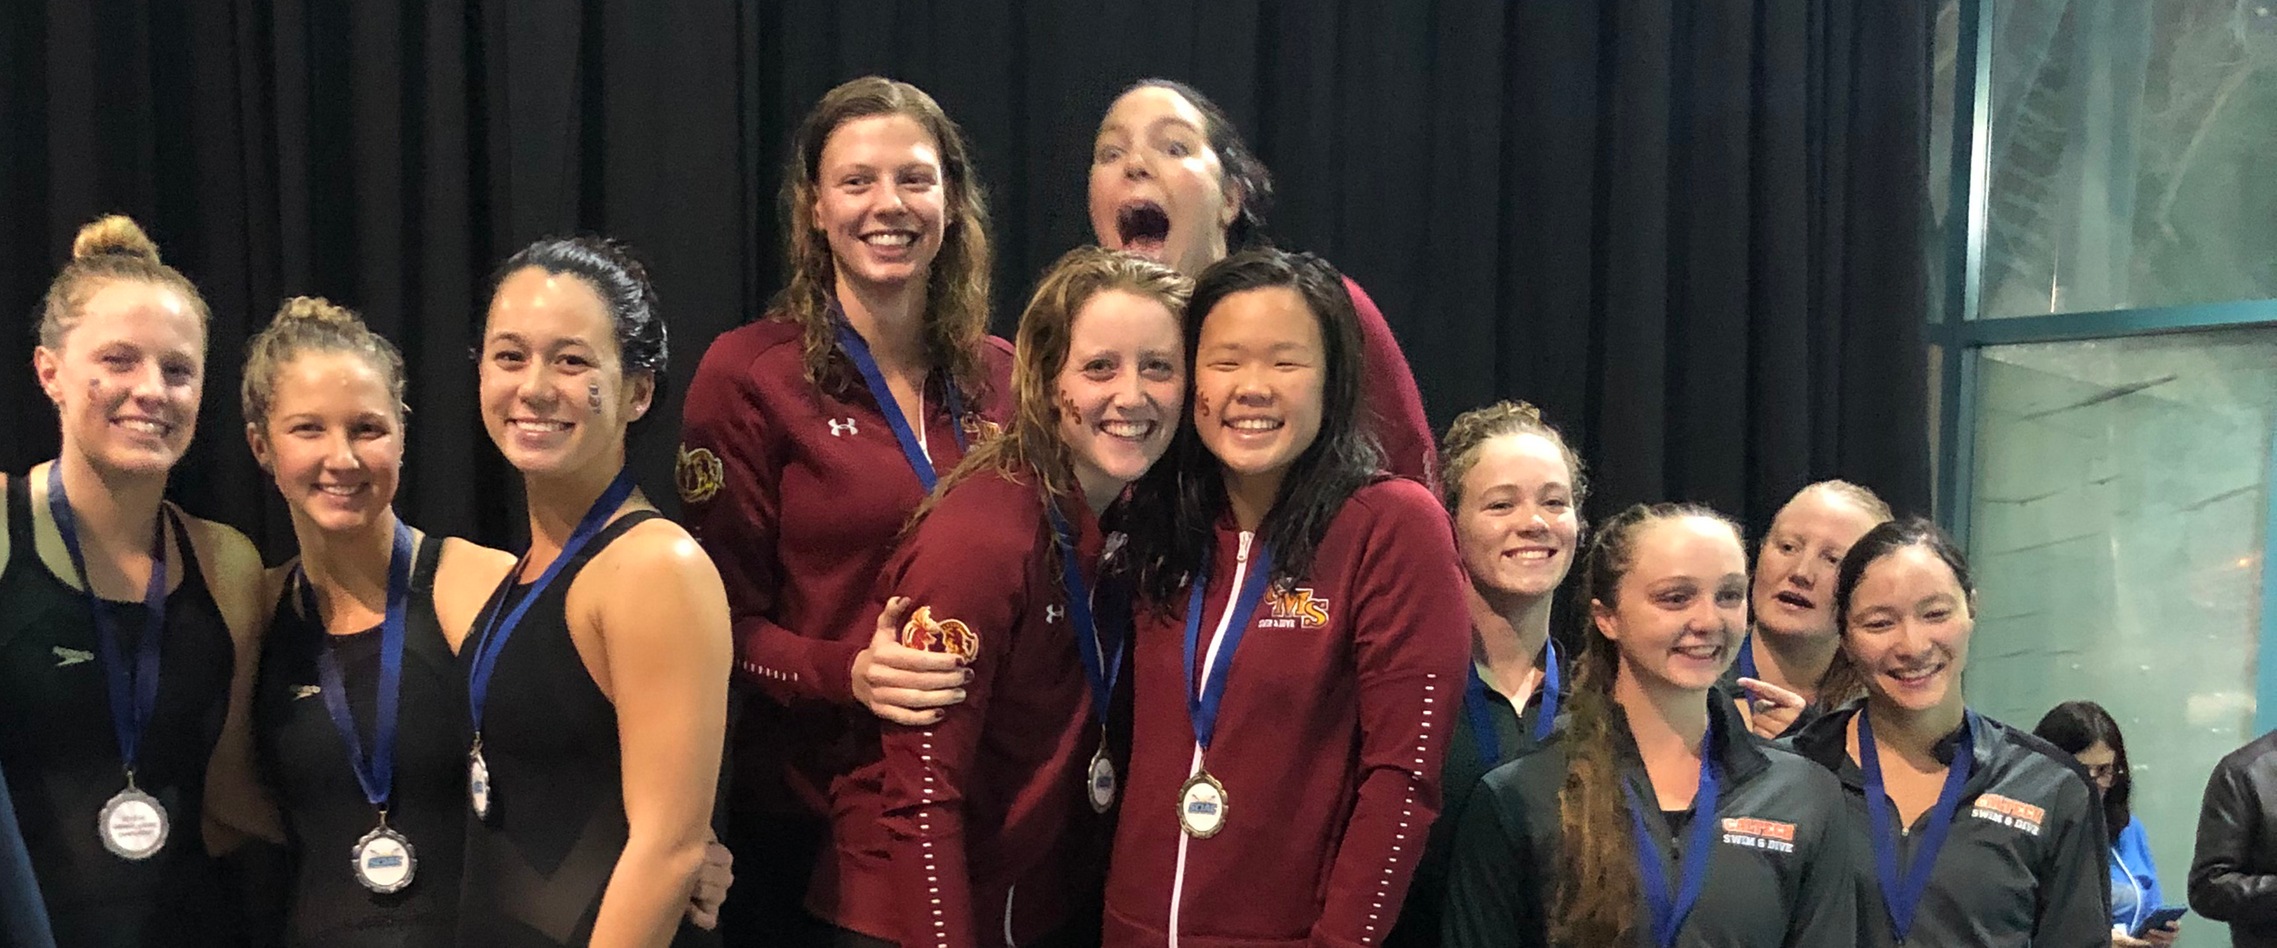 Athena 800 Freestyle Relay Takes Home First CMS Swimming Title at 2019 SCIAC Championships